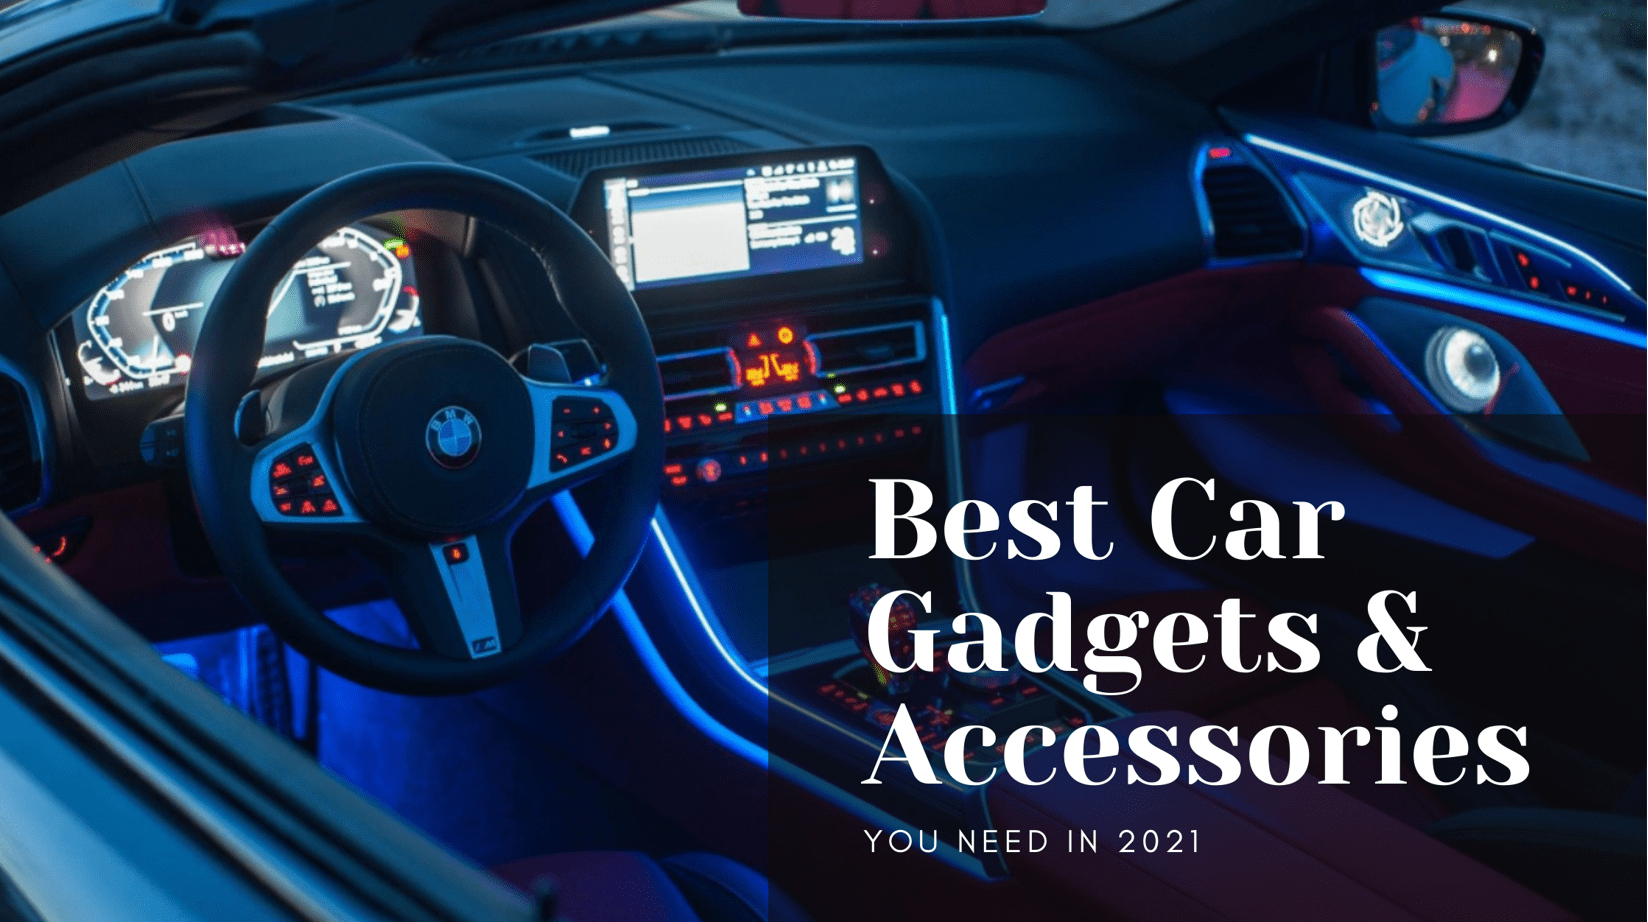 2021: Best Car Accessories and Gadgets - Autostore.pk